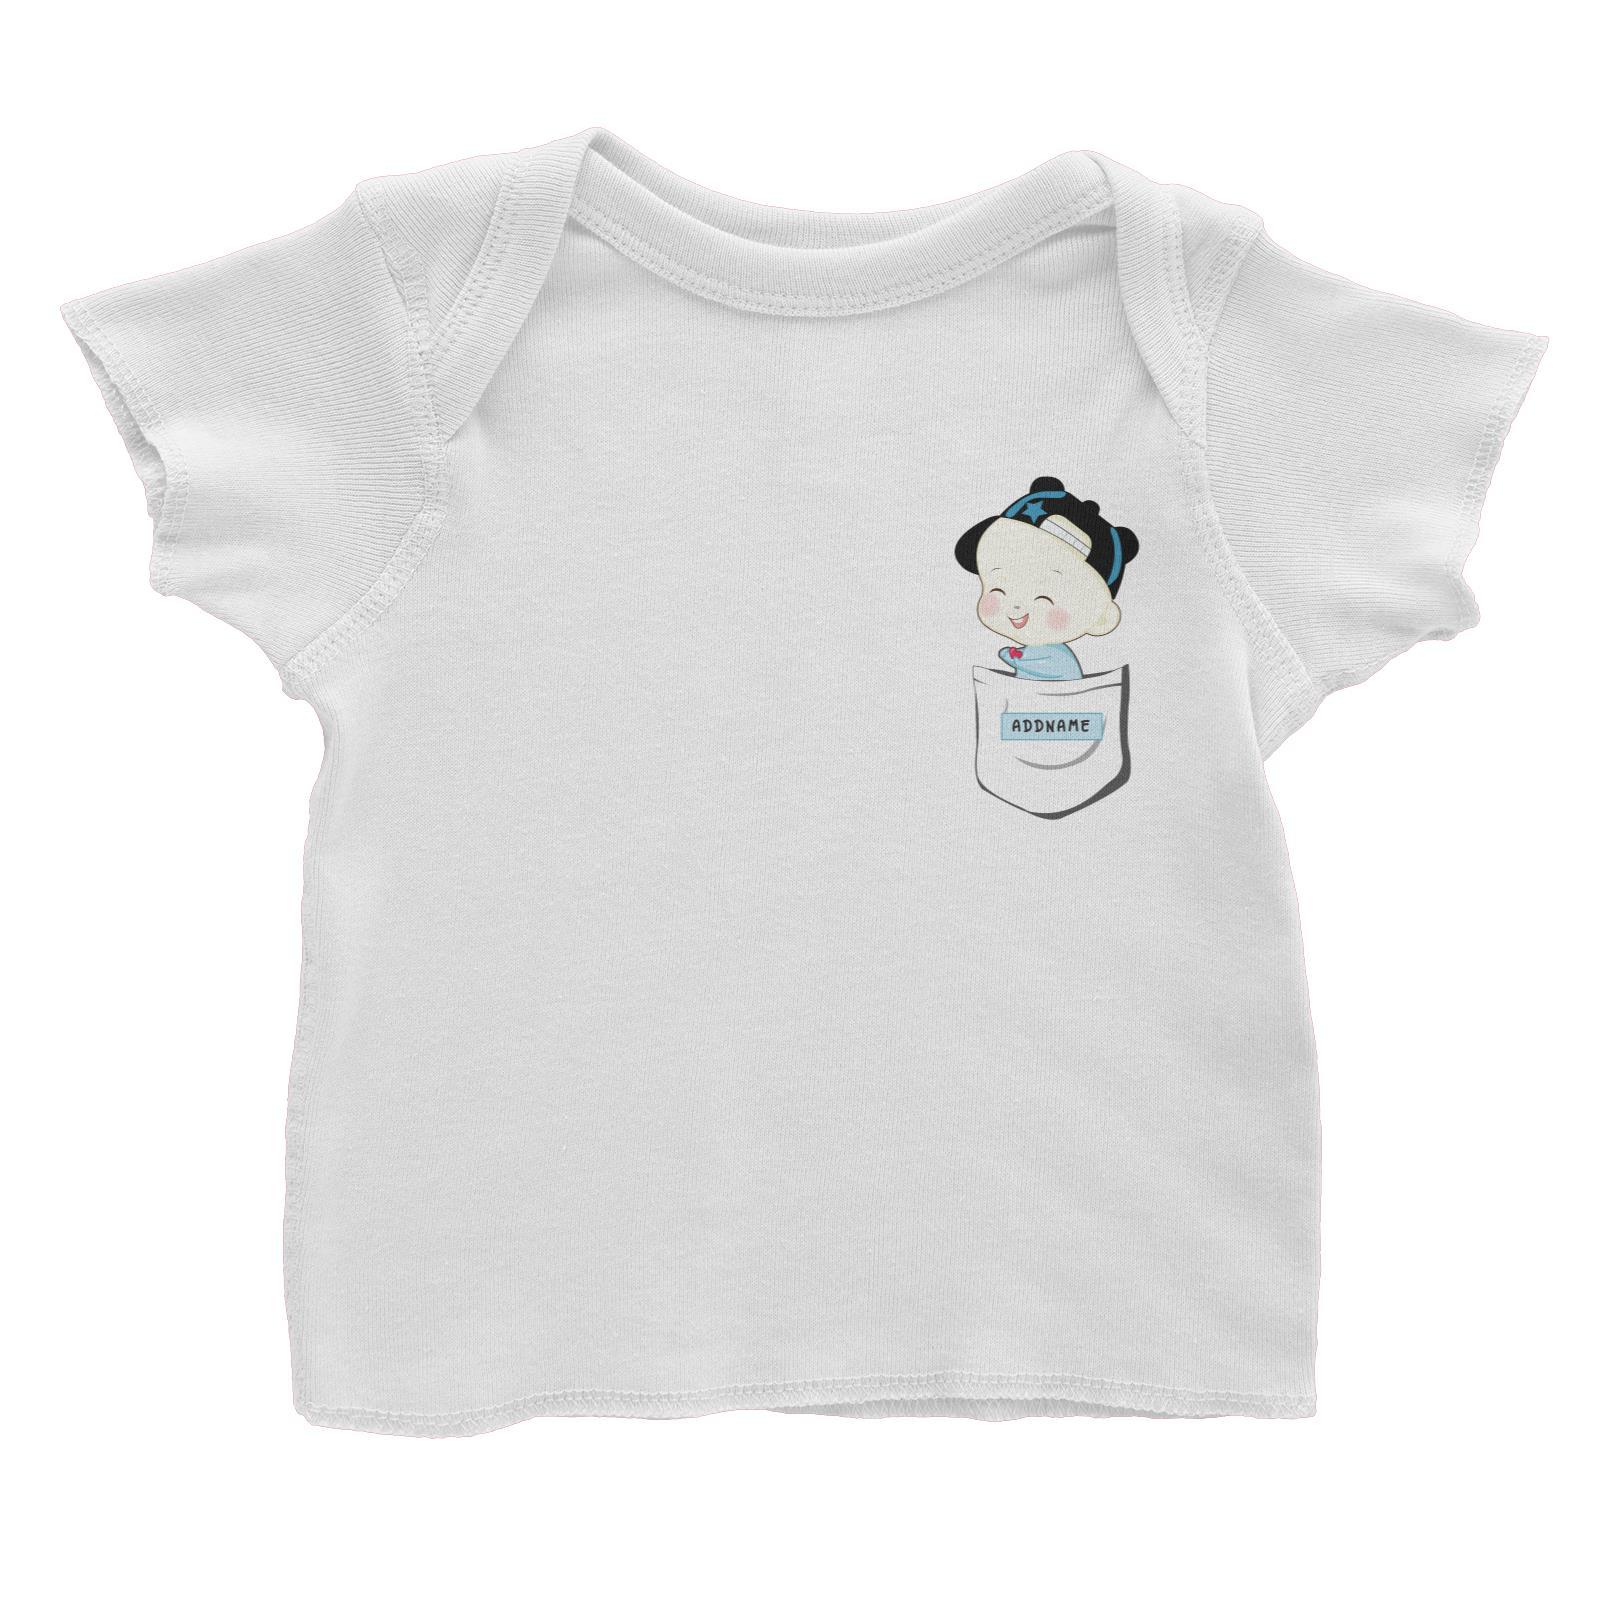 My Lovely Family Series Pocket Size Baby Boy Addname Baby T-Shirt